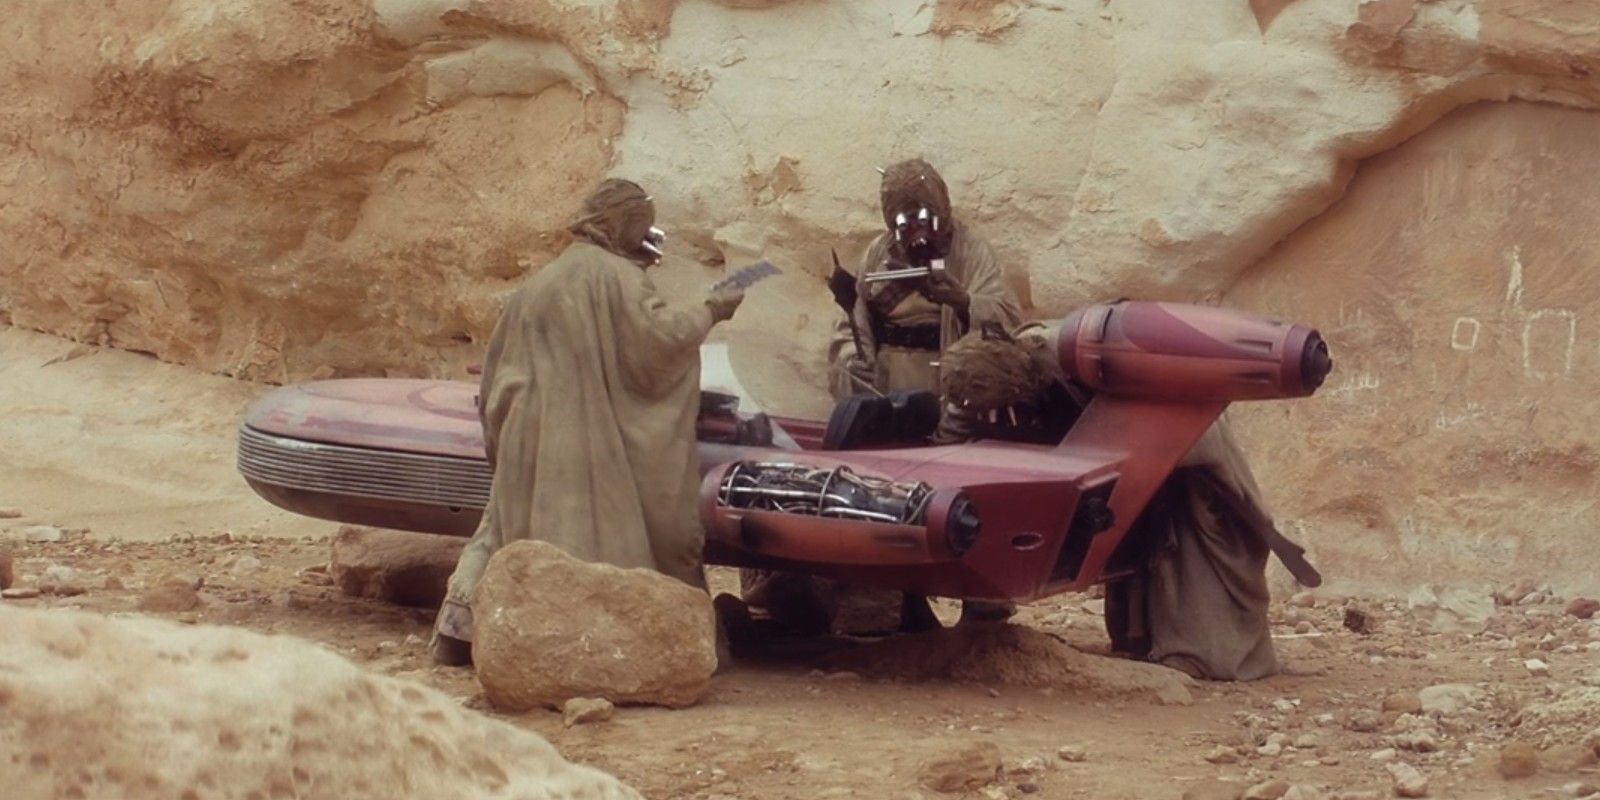 Tusken Raiders in A New Hope